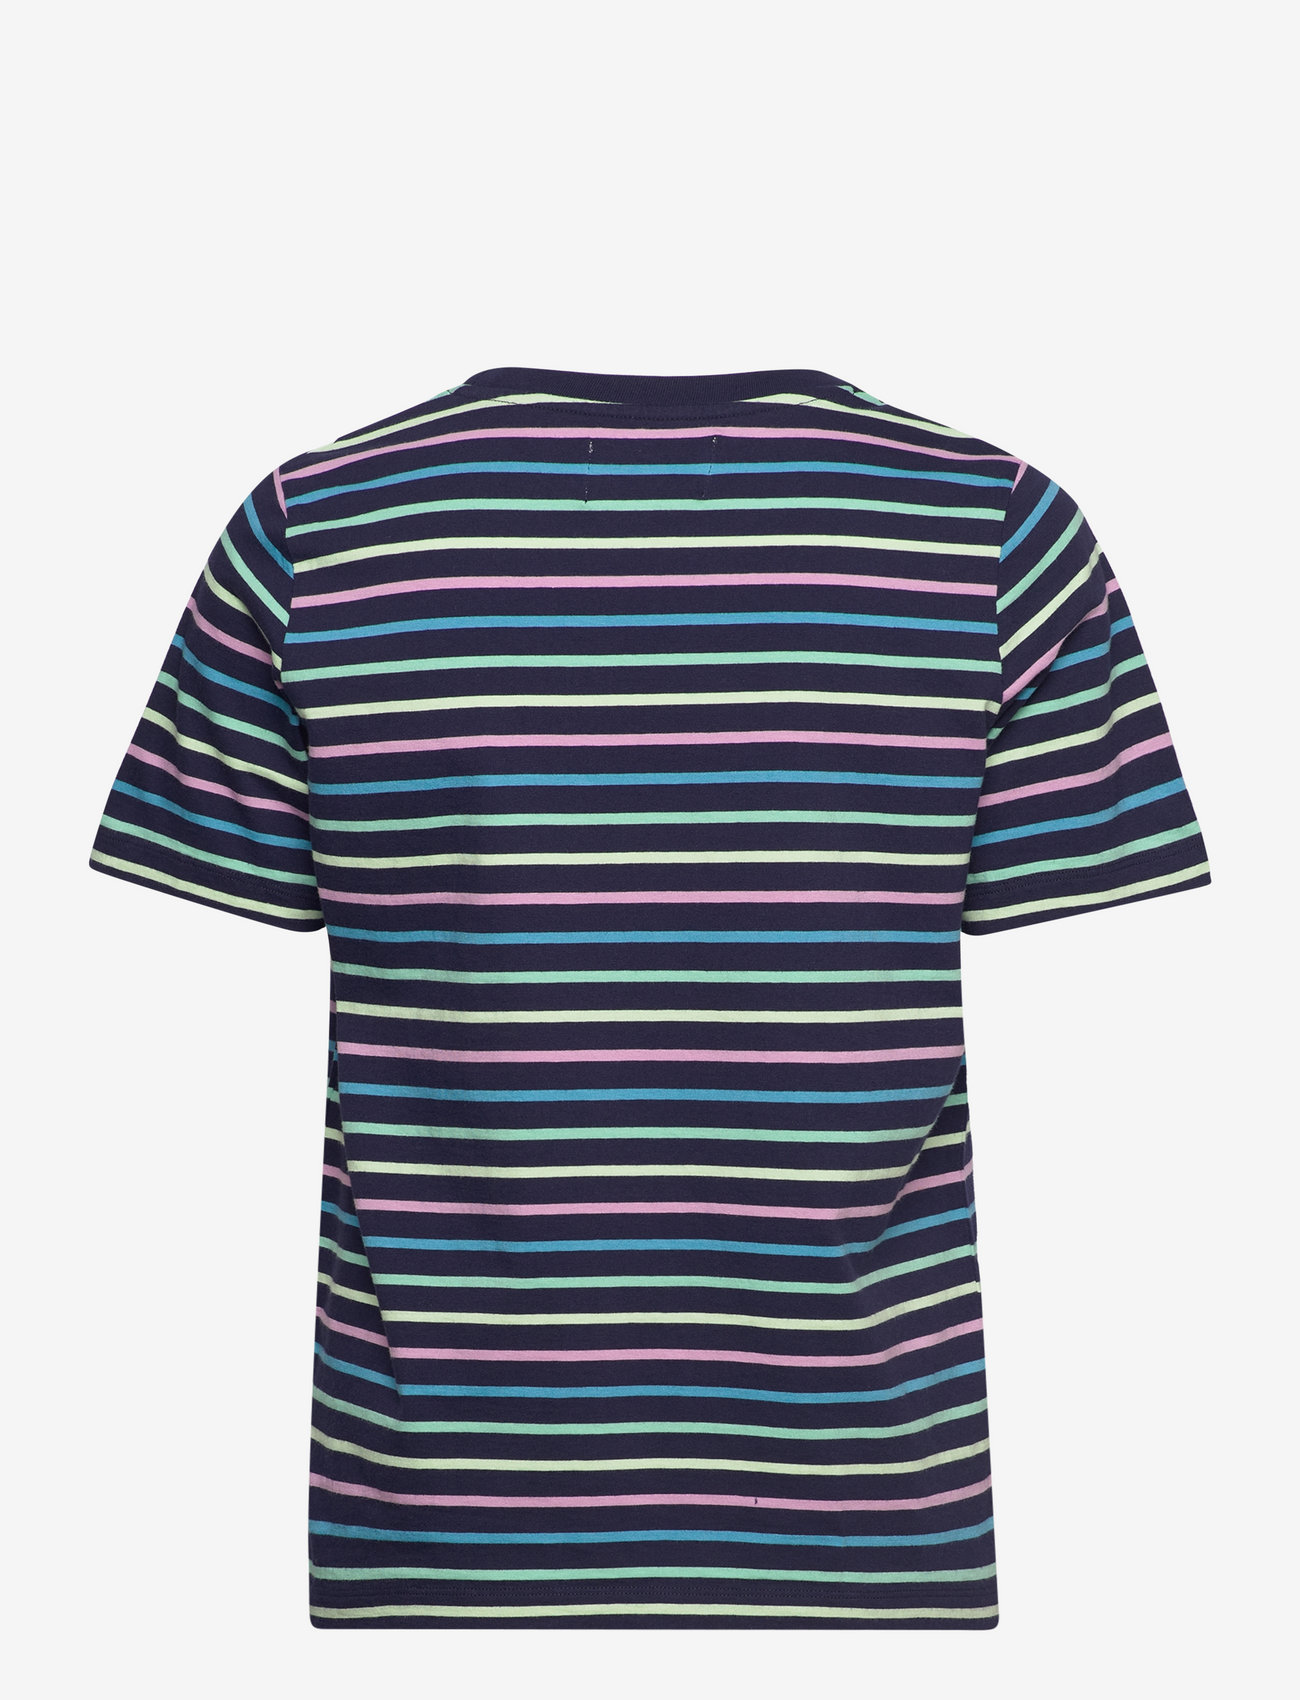 Double A by Wood Wood - Mia stripe T-shirt - t-shirts - navy stripes - 1